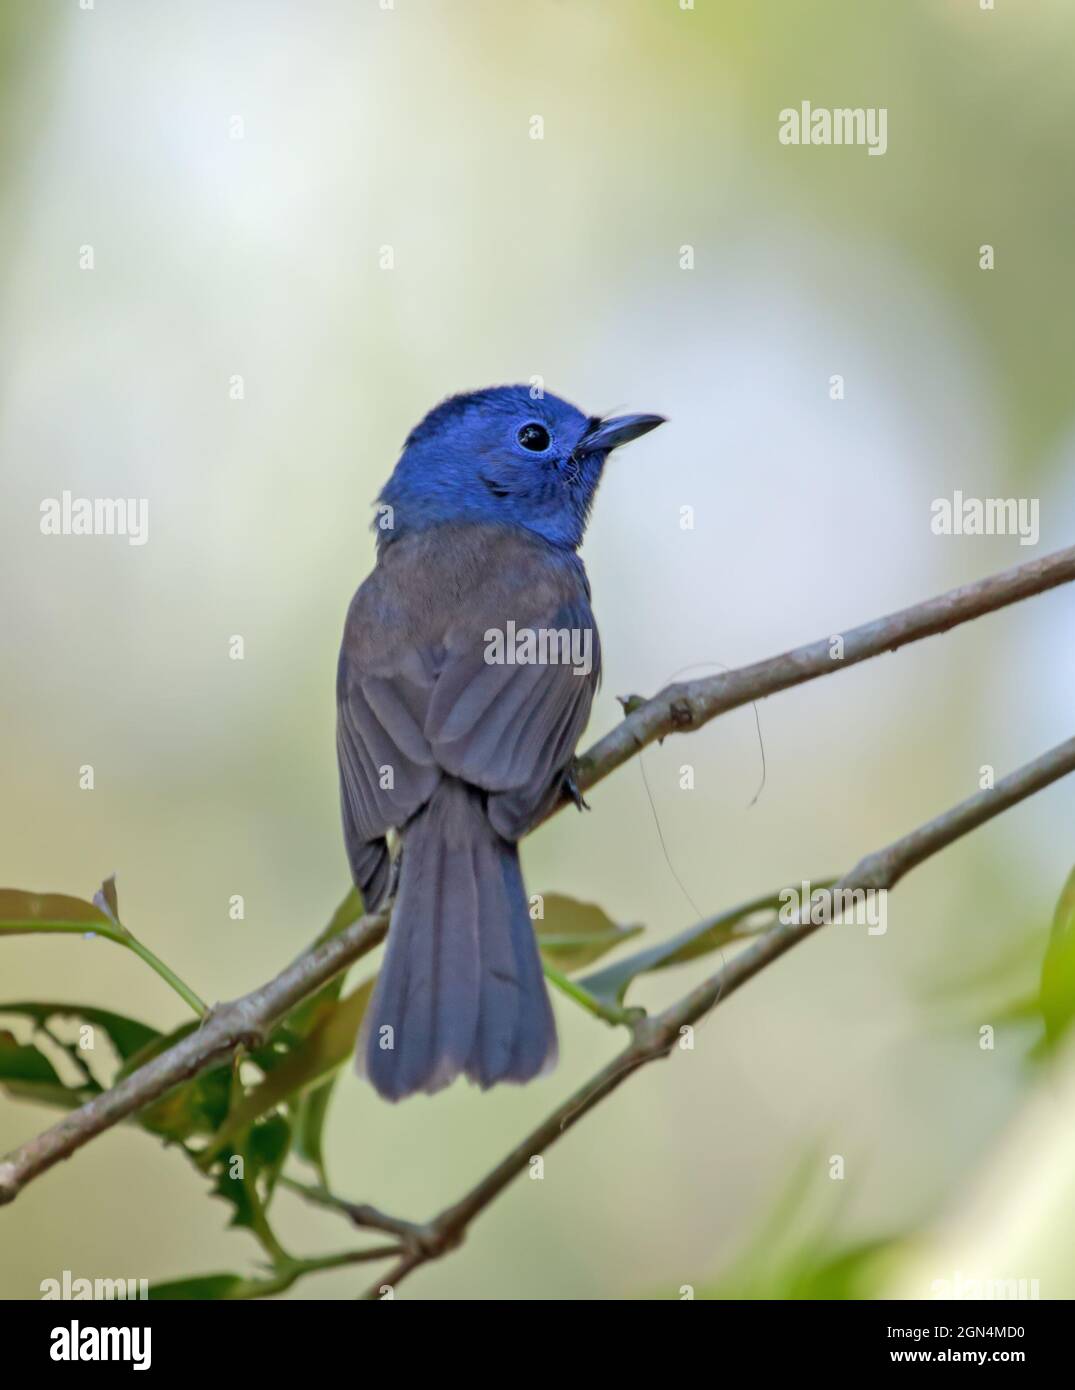 The black-naped monarch or black-naped blue flycatcher is a slim and agile passerine bird belonging to the family of monarch flycatchers found in sout Stock Photo